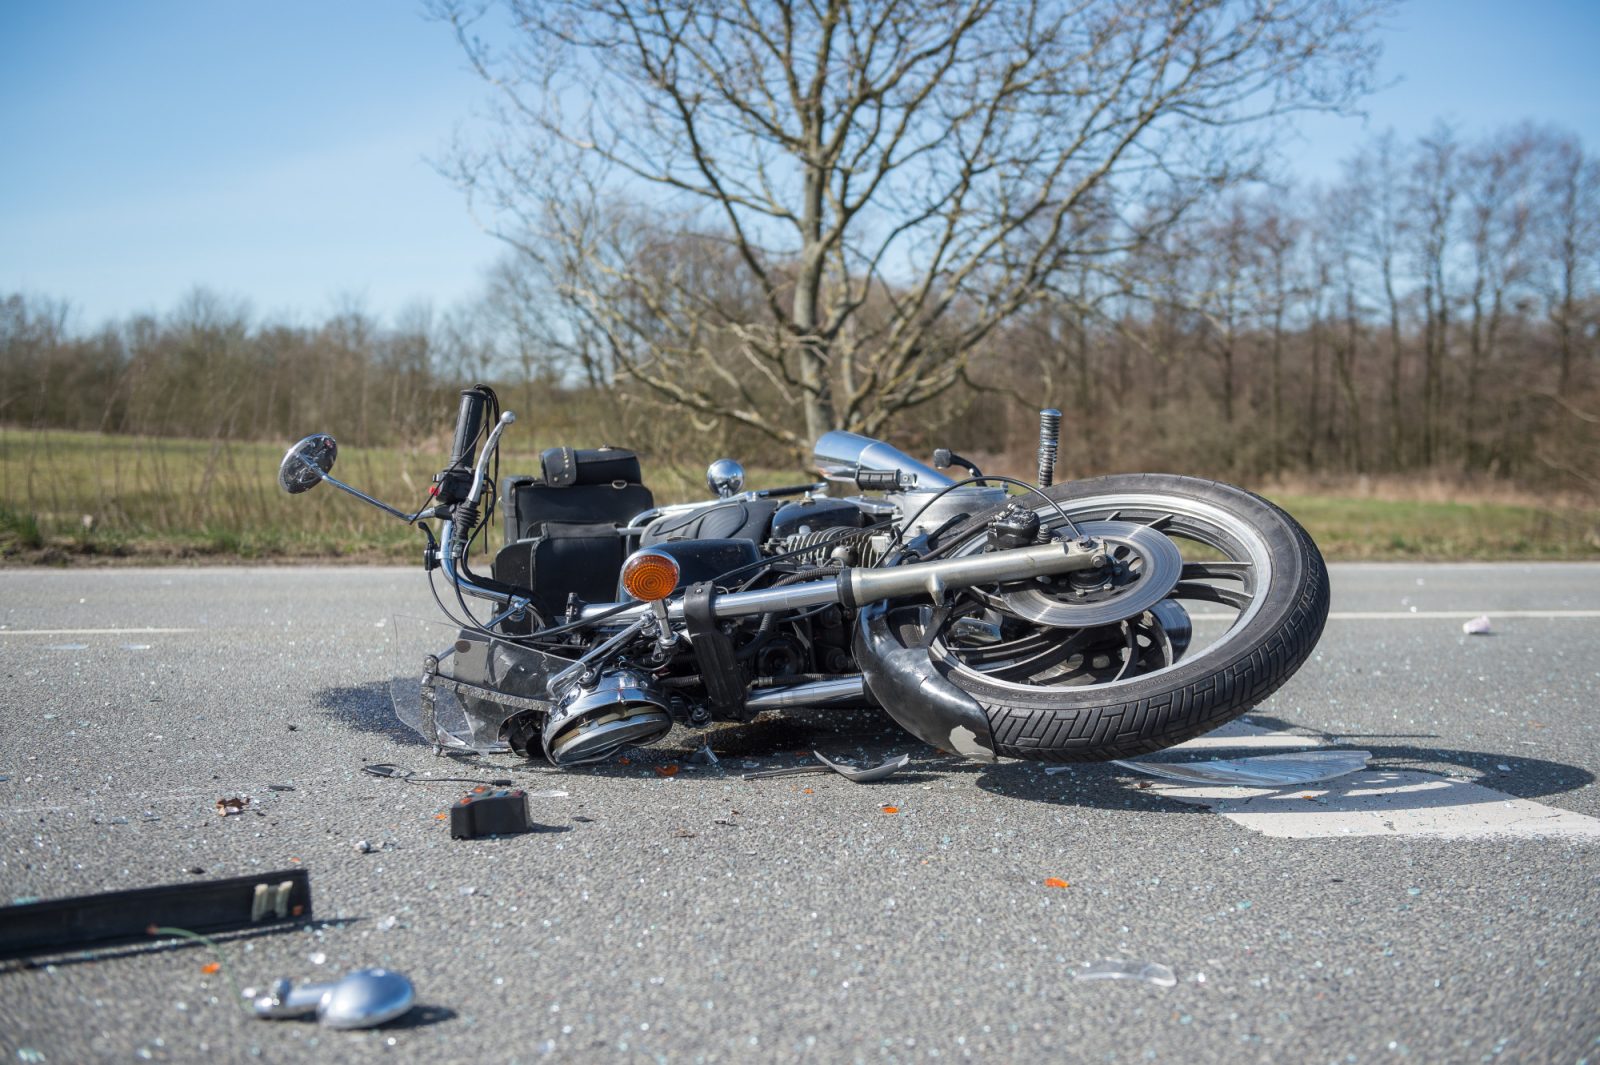 What Are My Rights in Florida After A Serious Motorcycle Accident? – CarNewsCafe